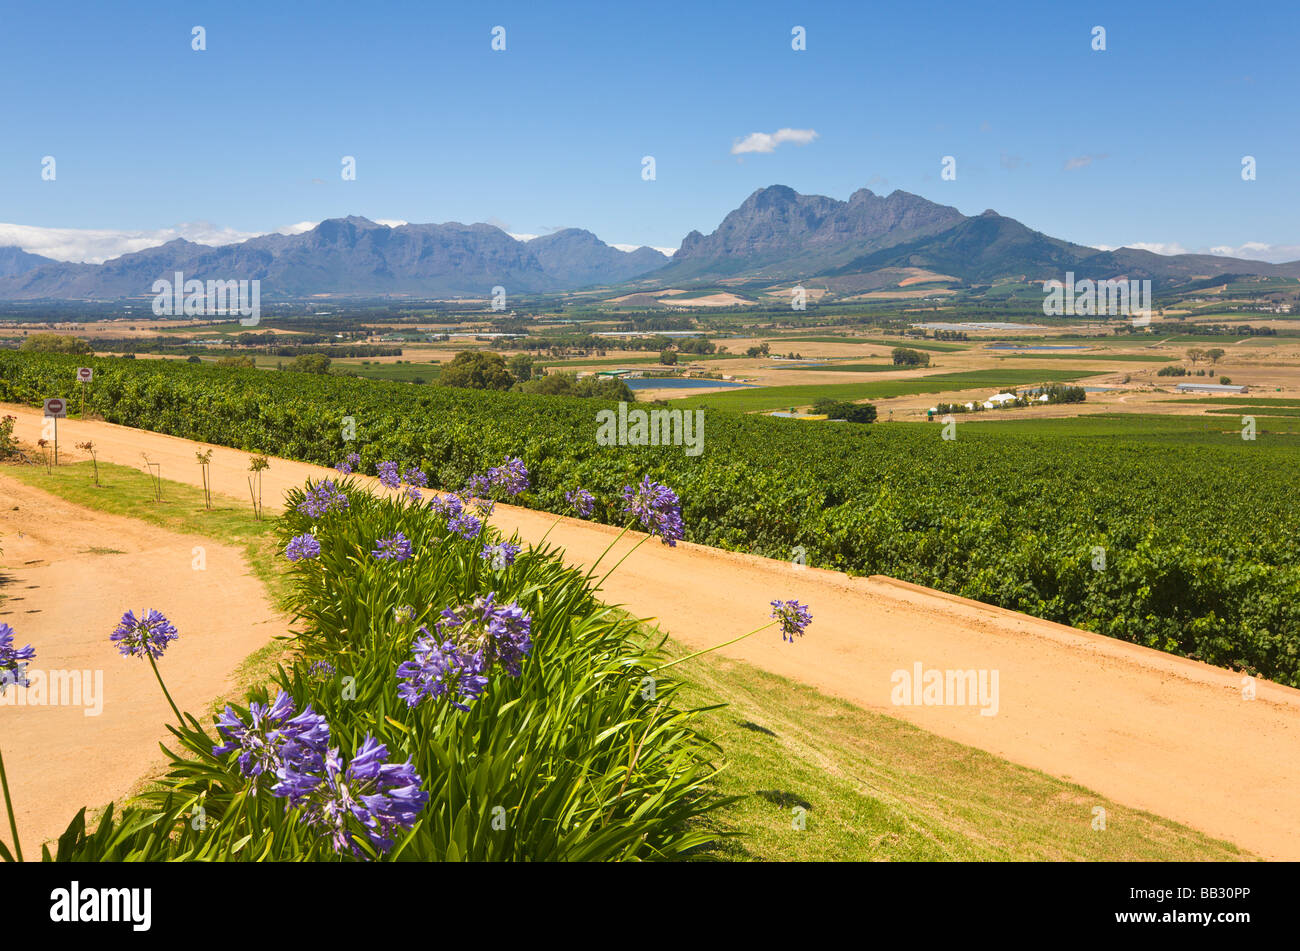 Vineyards and mountains, Stellenbosch, 'South Africa' Stock Photo